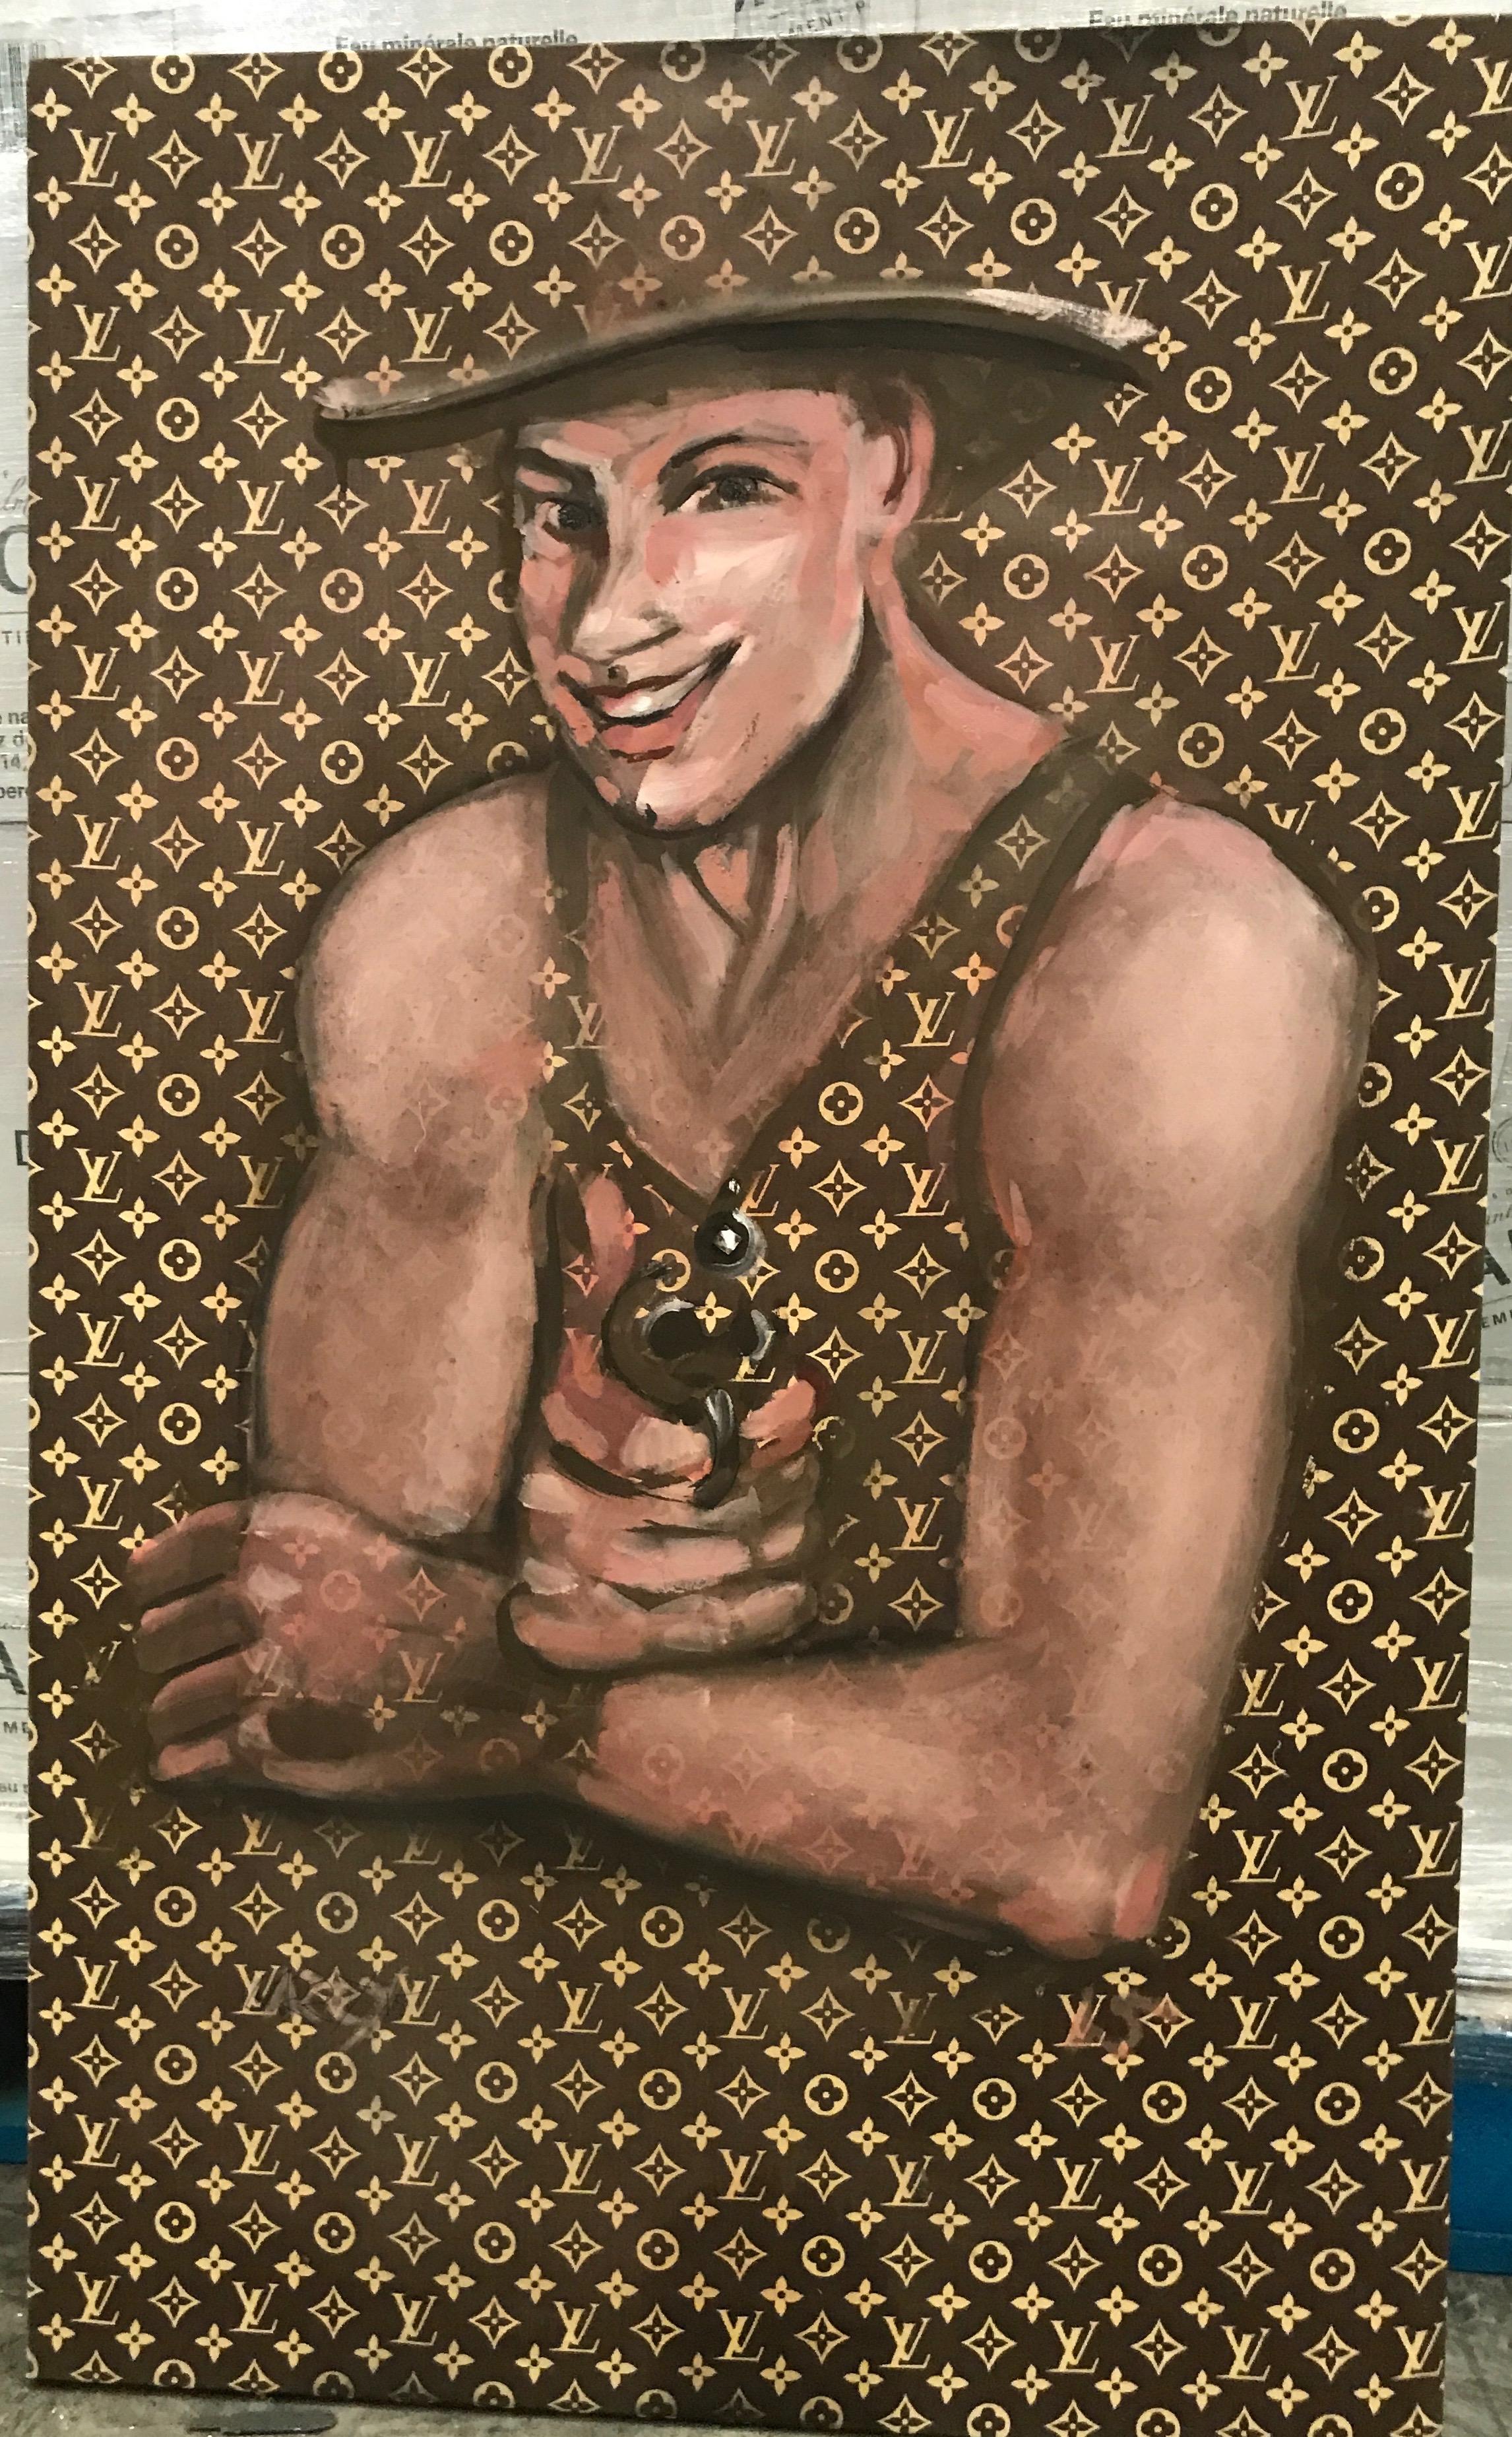 Large painting on Louis Vuitton canvas made by Dominique Larrivaz in France in 2015.
Unique creation made live by Larry during a vernissage at the Art and Design Gallery in Paris in June 2015.
Dominique Larrivaz (1961-2017), Larry shared his